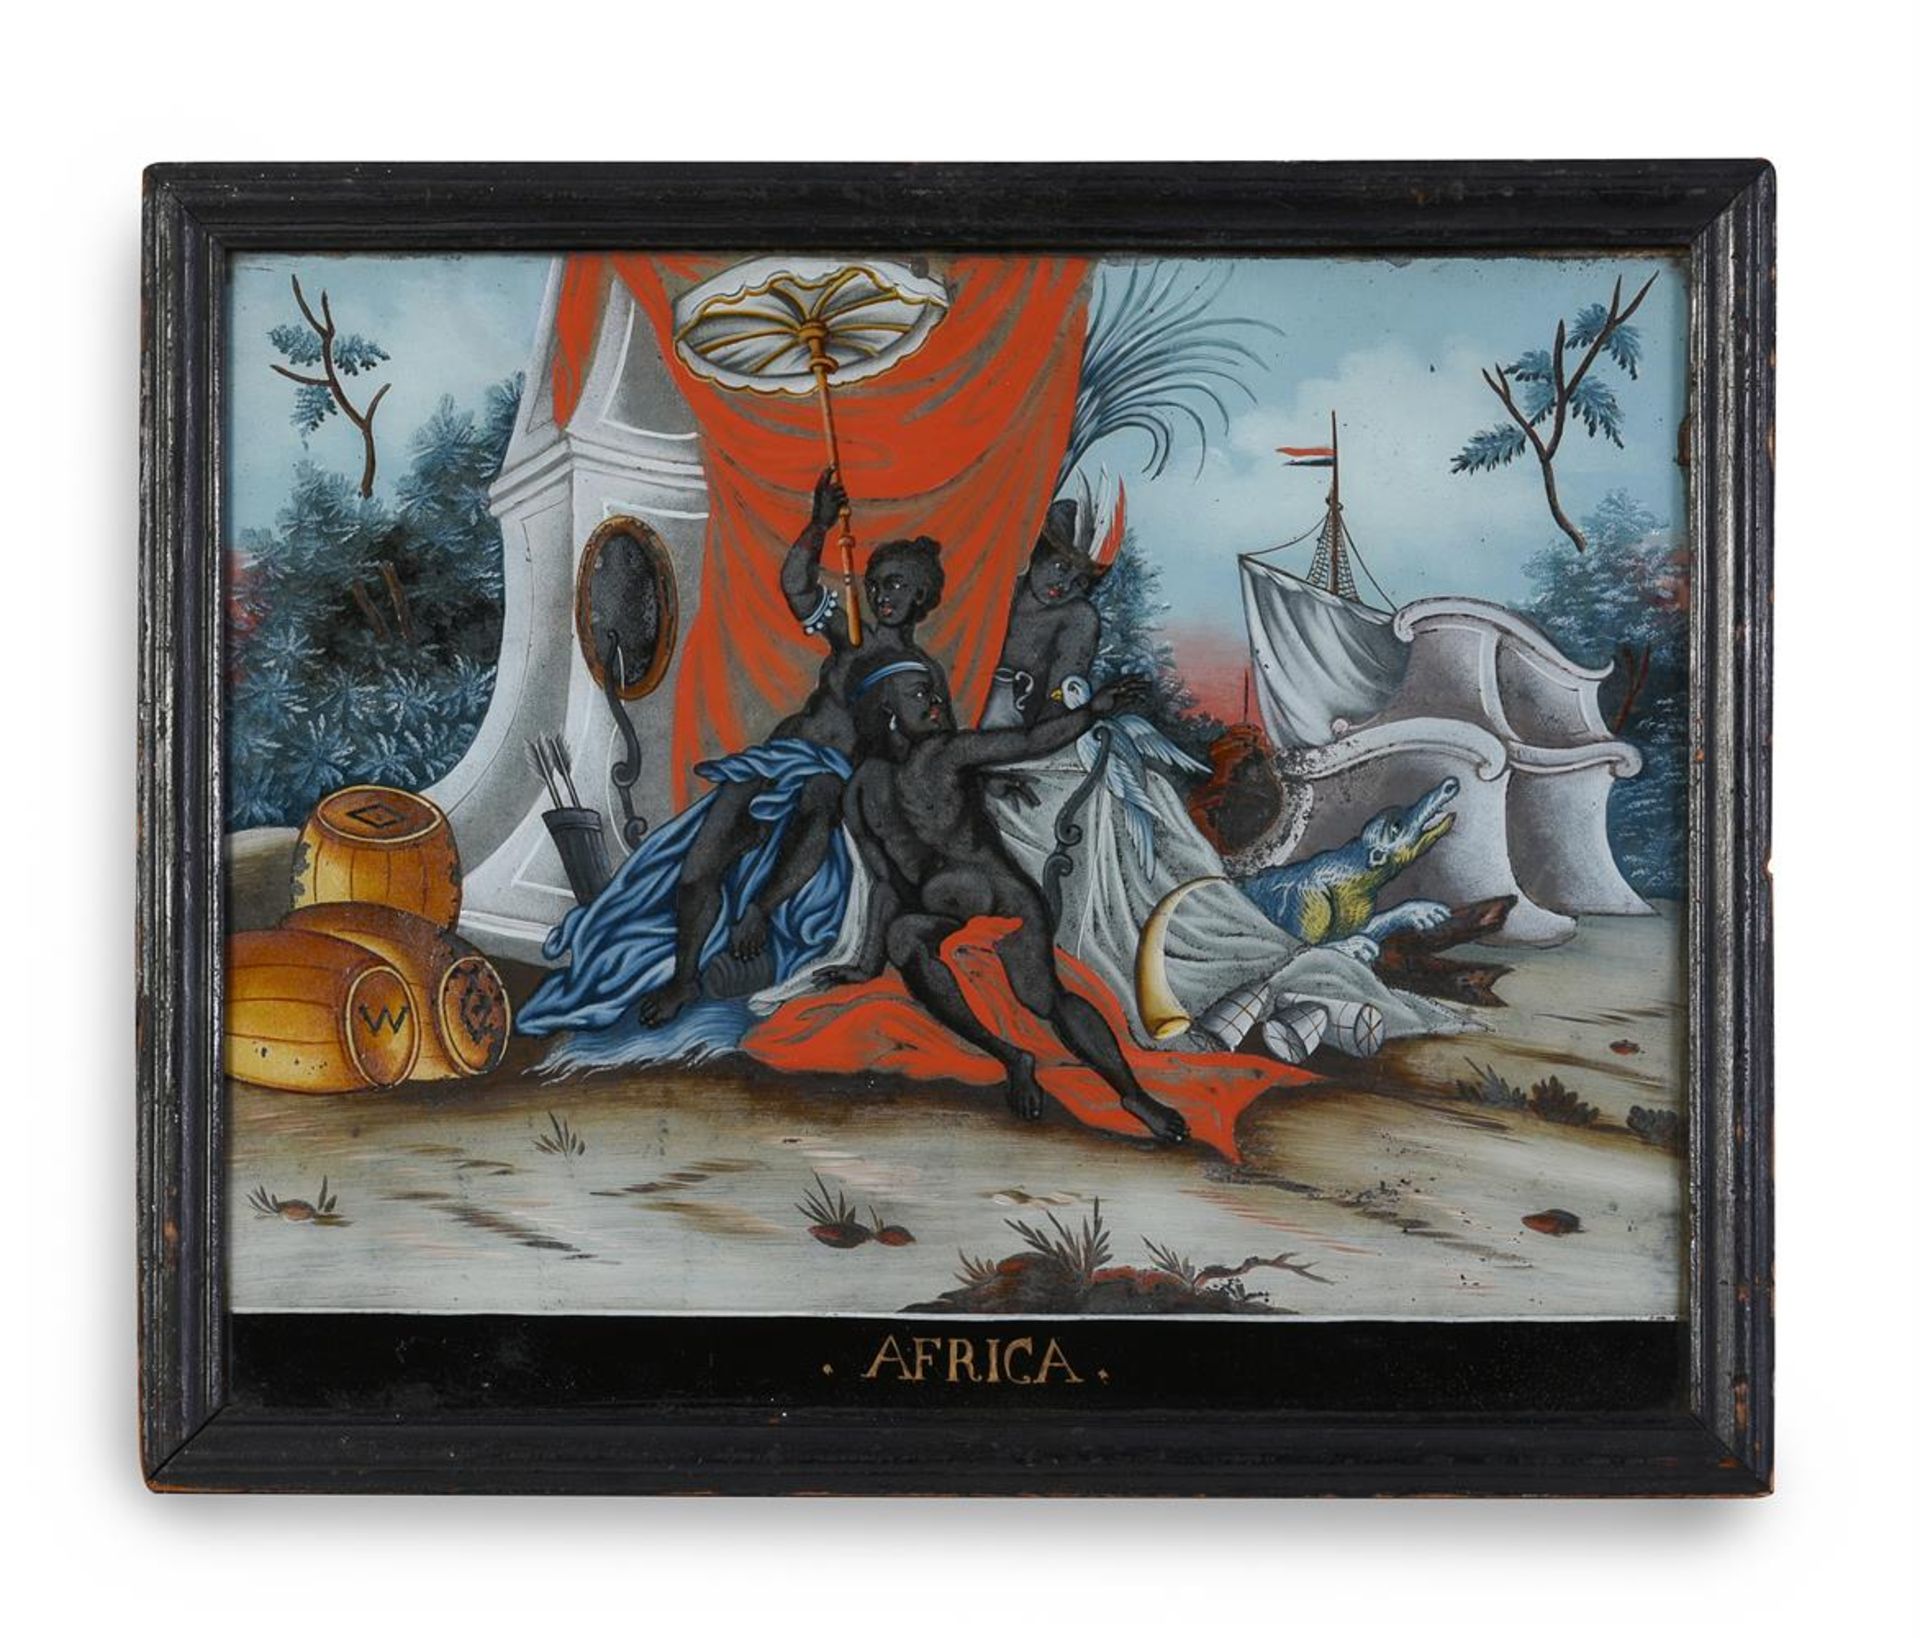 ENGLISH SCHOOL (LATE 18TH CENTURY), ALLEGORY OF 'AFRICA'